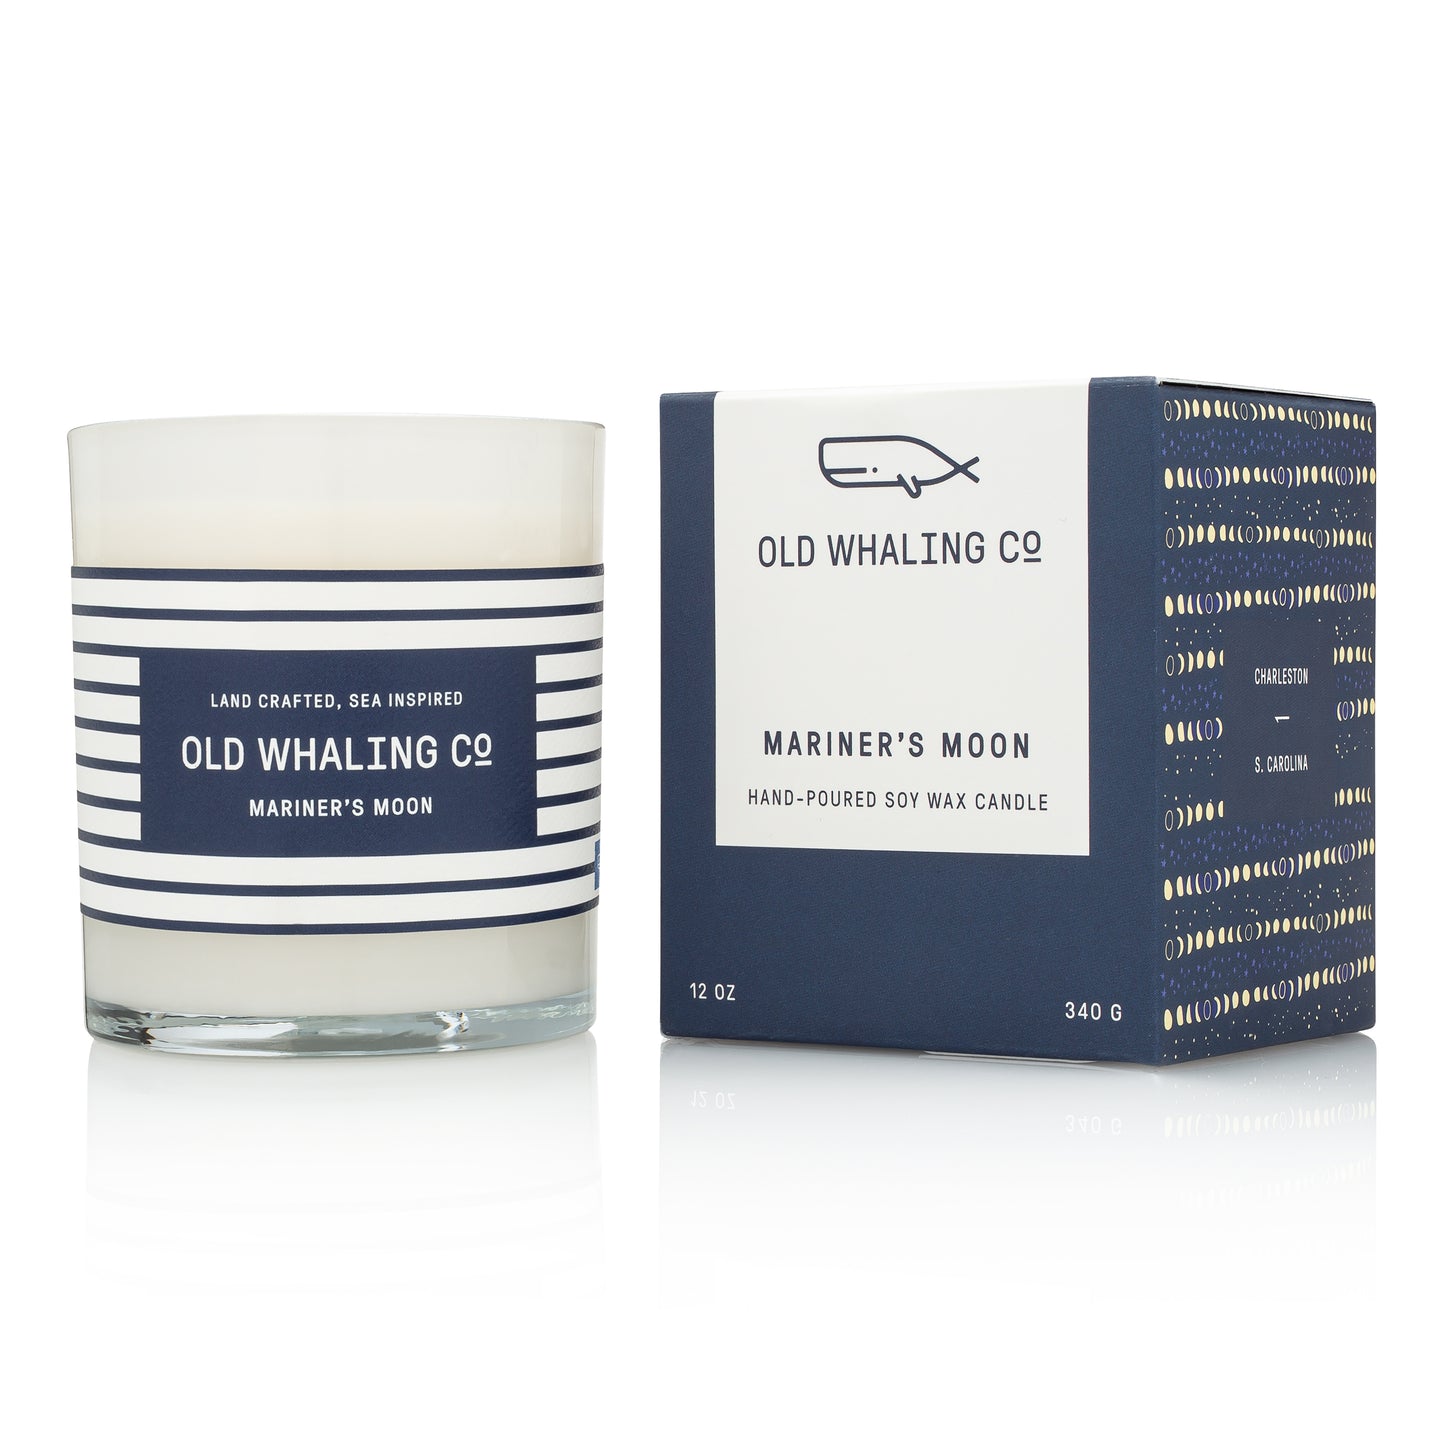 Mariner's Moon Candle